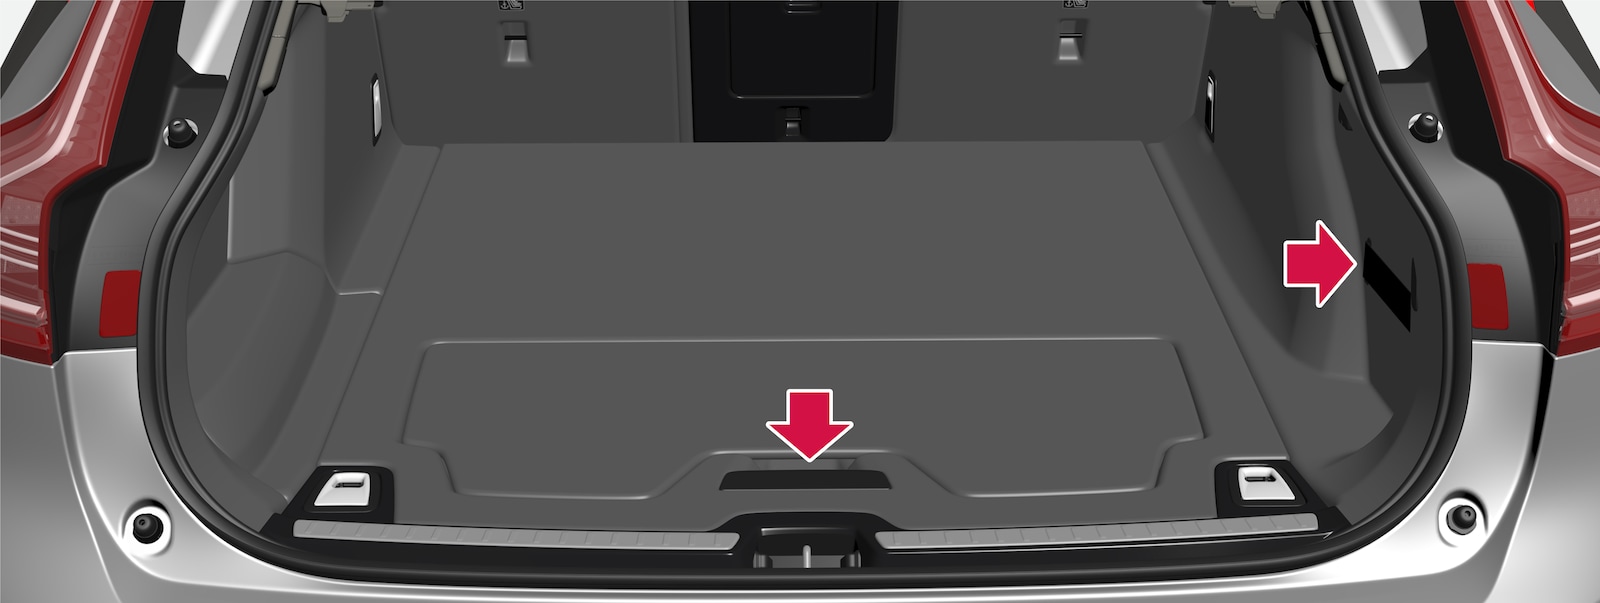 P5-2122-V60-V90-Melco/iCup-Luggage storage overview